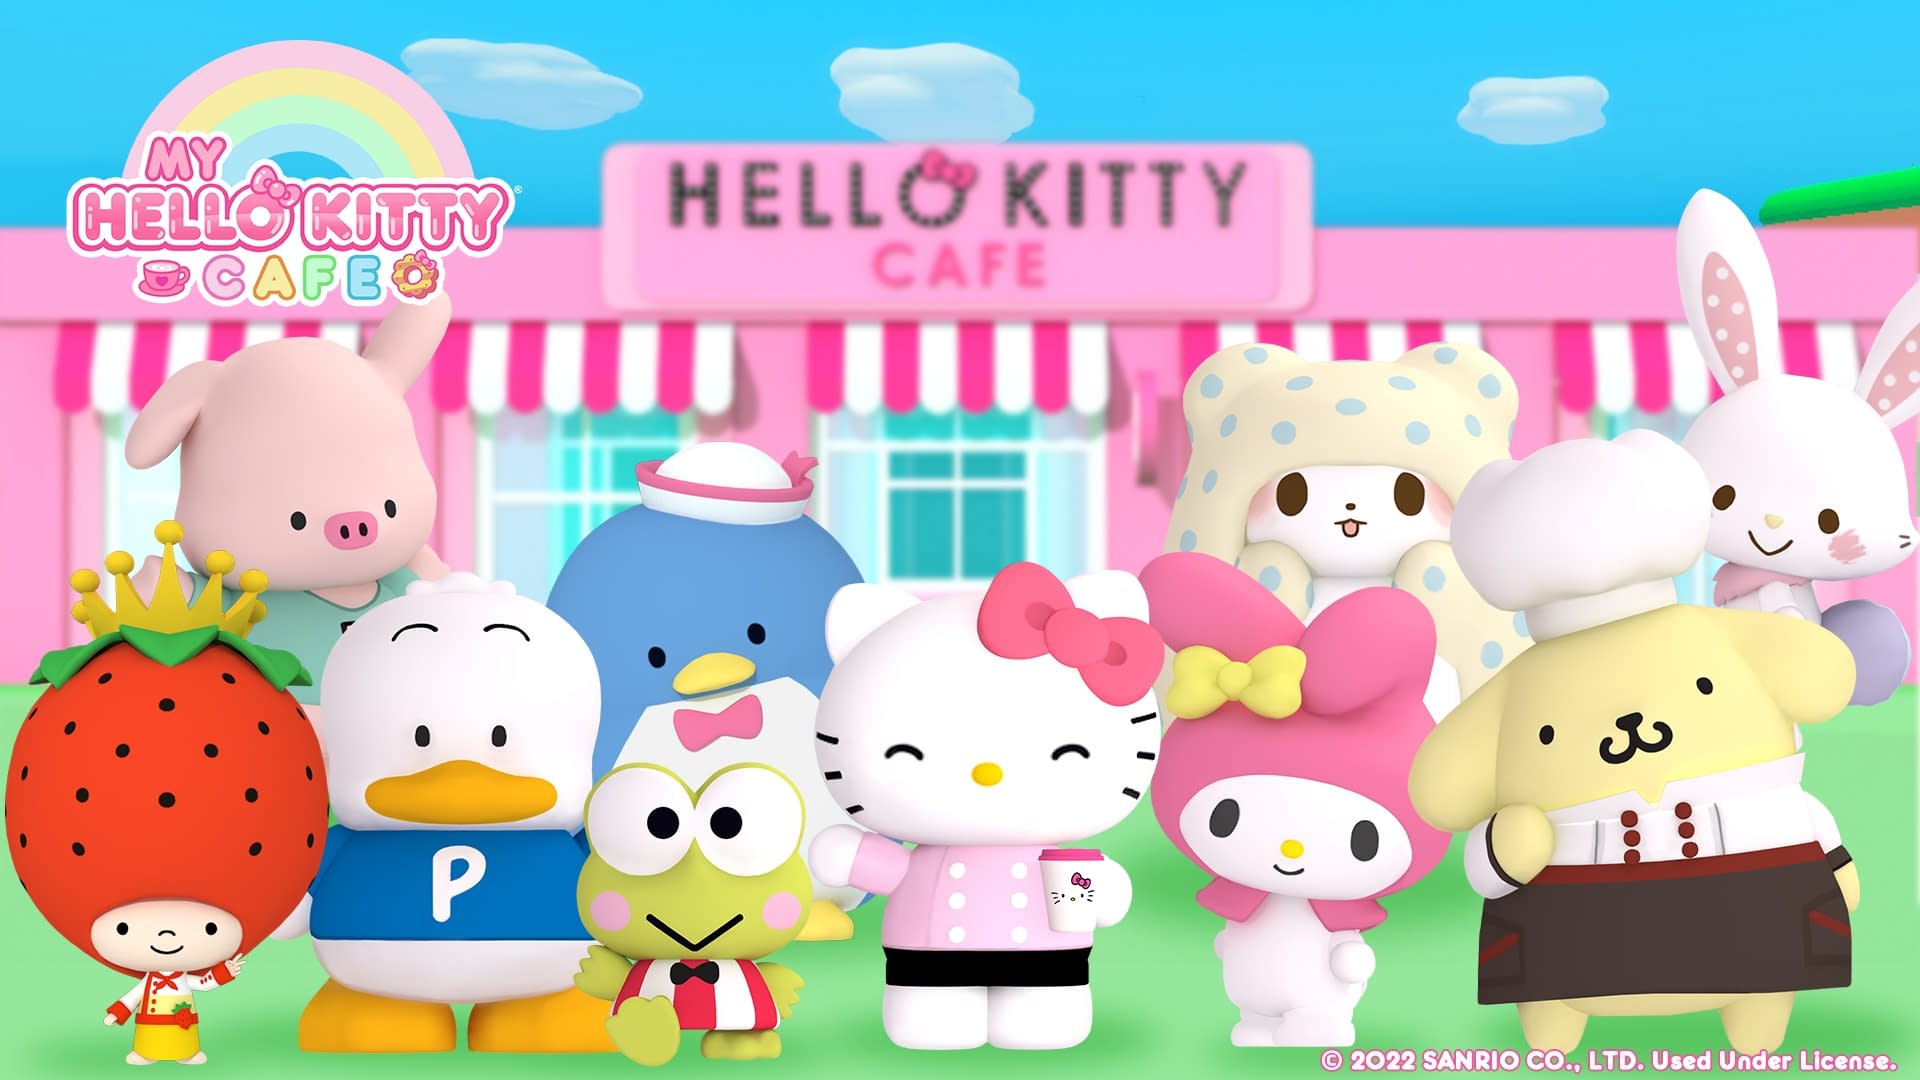 Hello Kitty on X Oh no My Melody receives her first thumbs down on her  latest craft video on CuteTube  Will Hello Kitty help her discover who  sent it Watch the